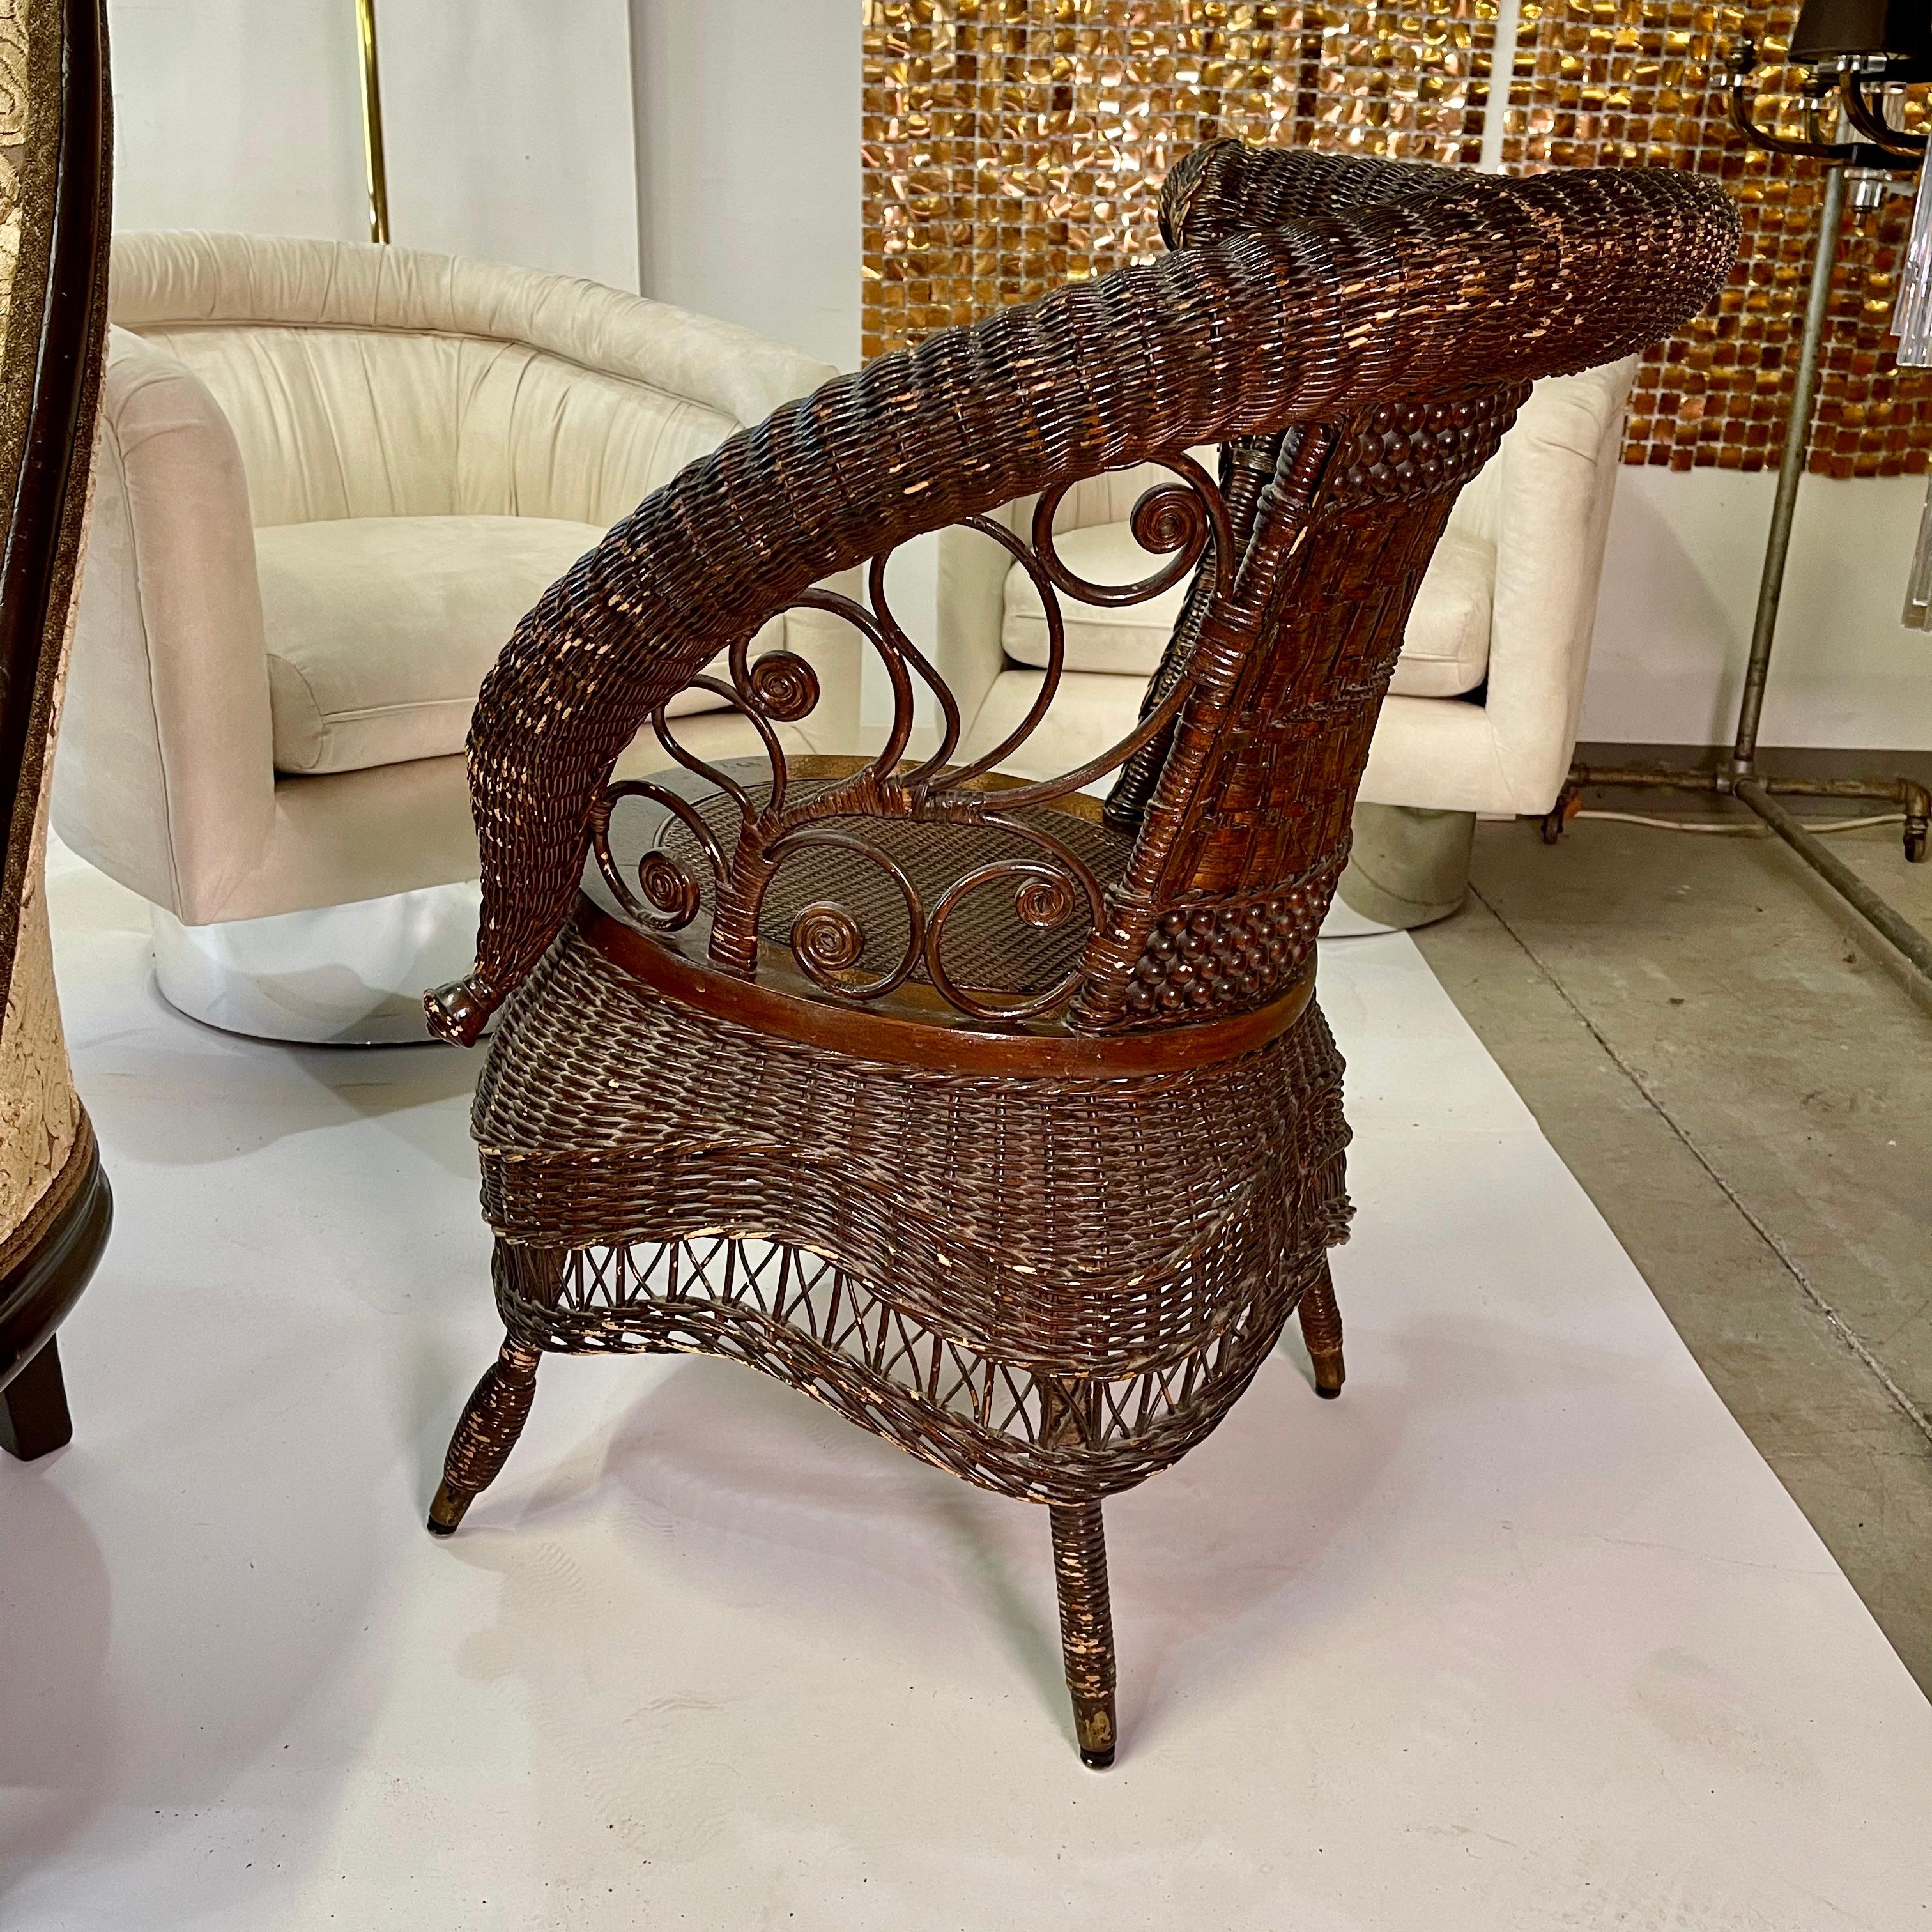 Jenkins & Phipps Stick and Ball Wicker Portrait Chair In Good Condition For Sale In Hanover, MA